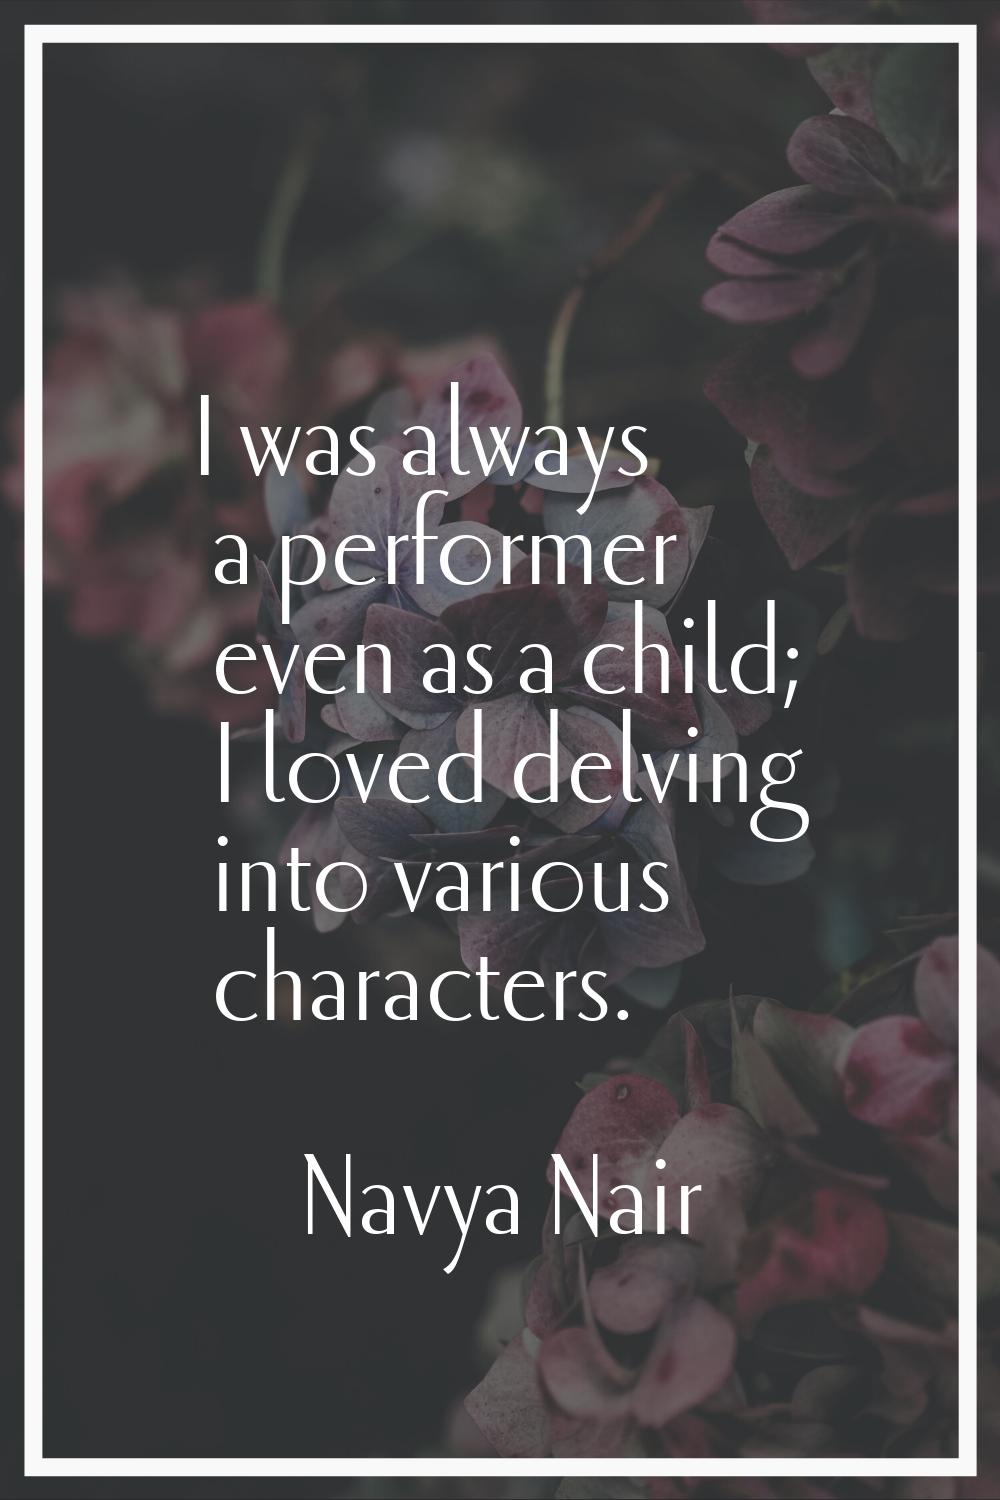 I was always a performer even as a child; I loved delving into various characters.